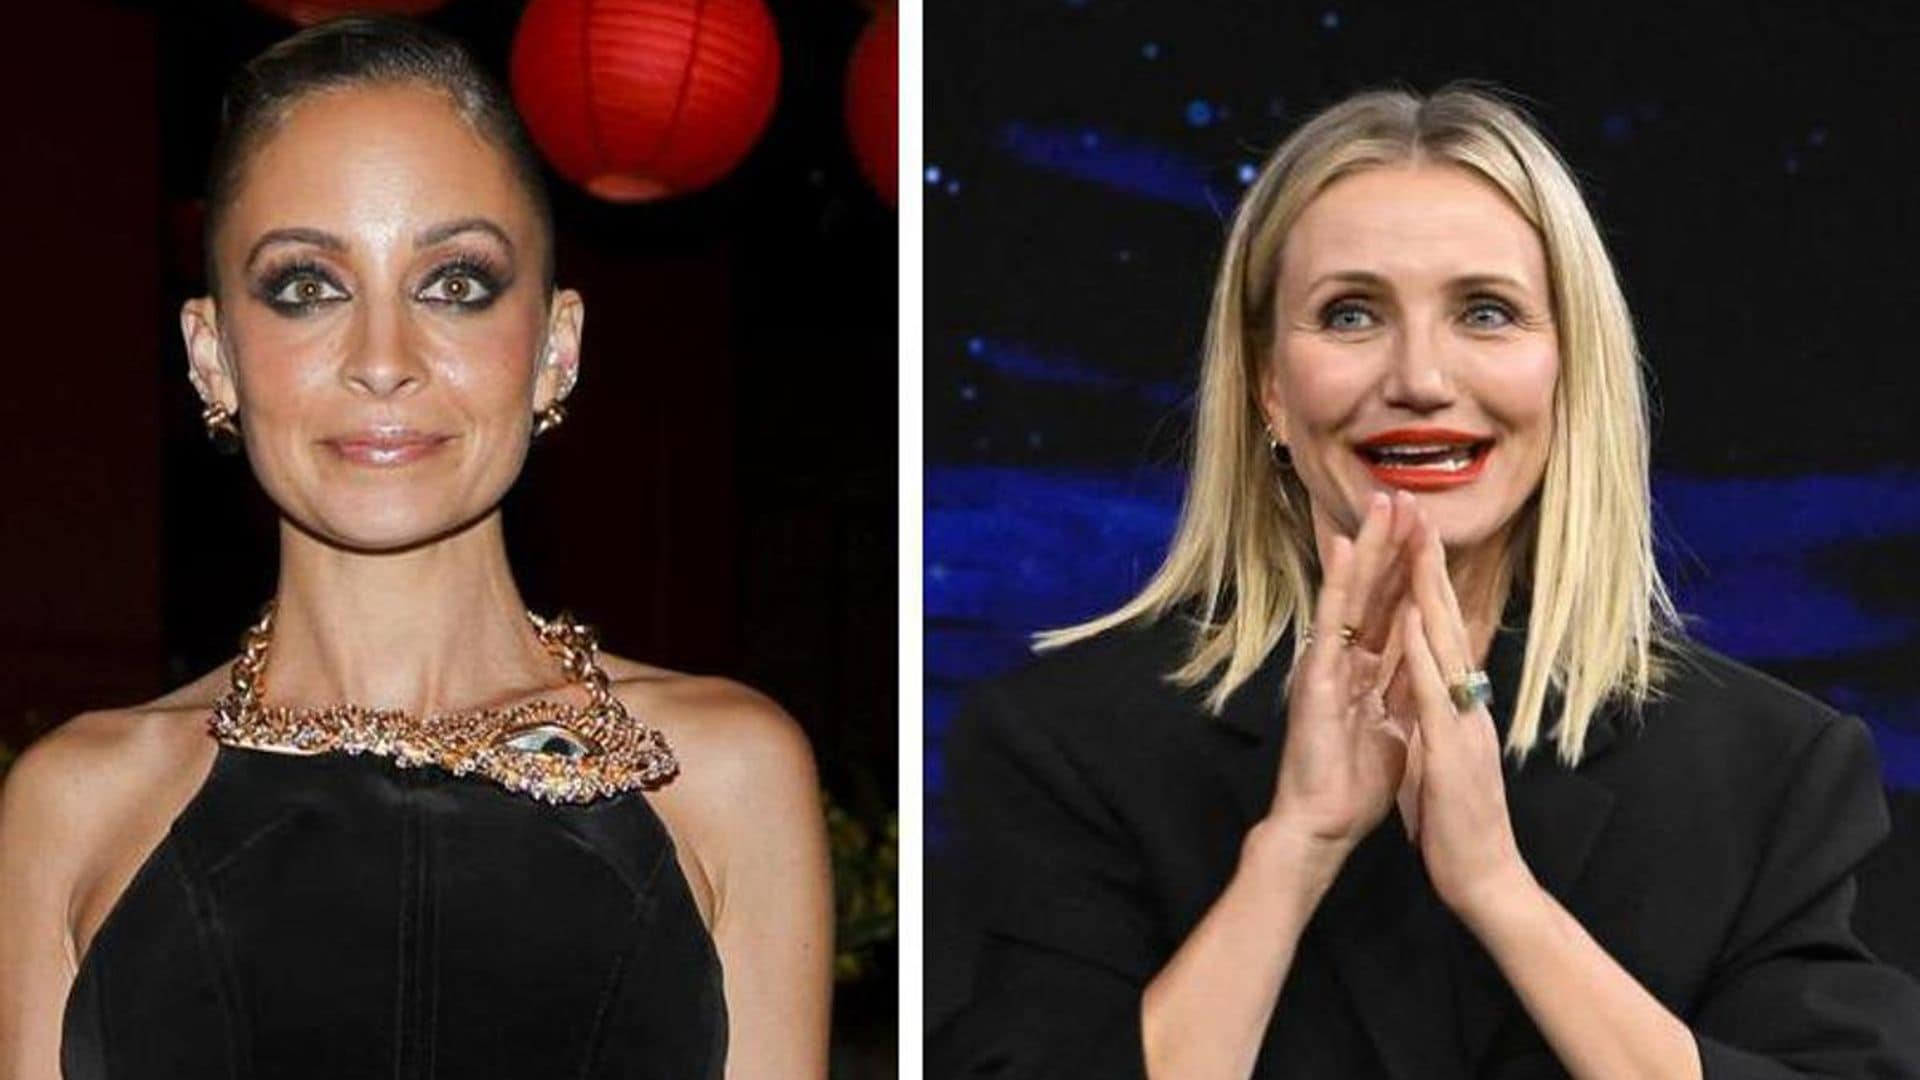 Nicole Richie reacts after Cameron Diaz and Benji Madden also named their son after a bird